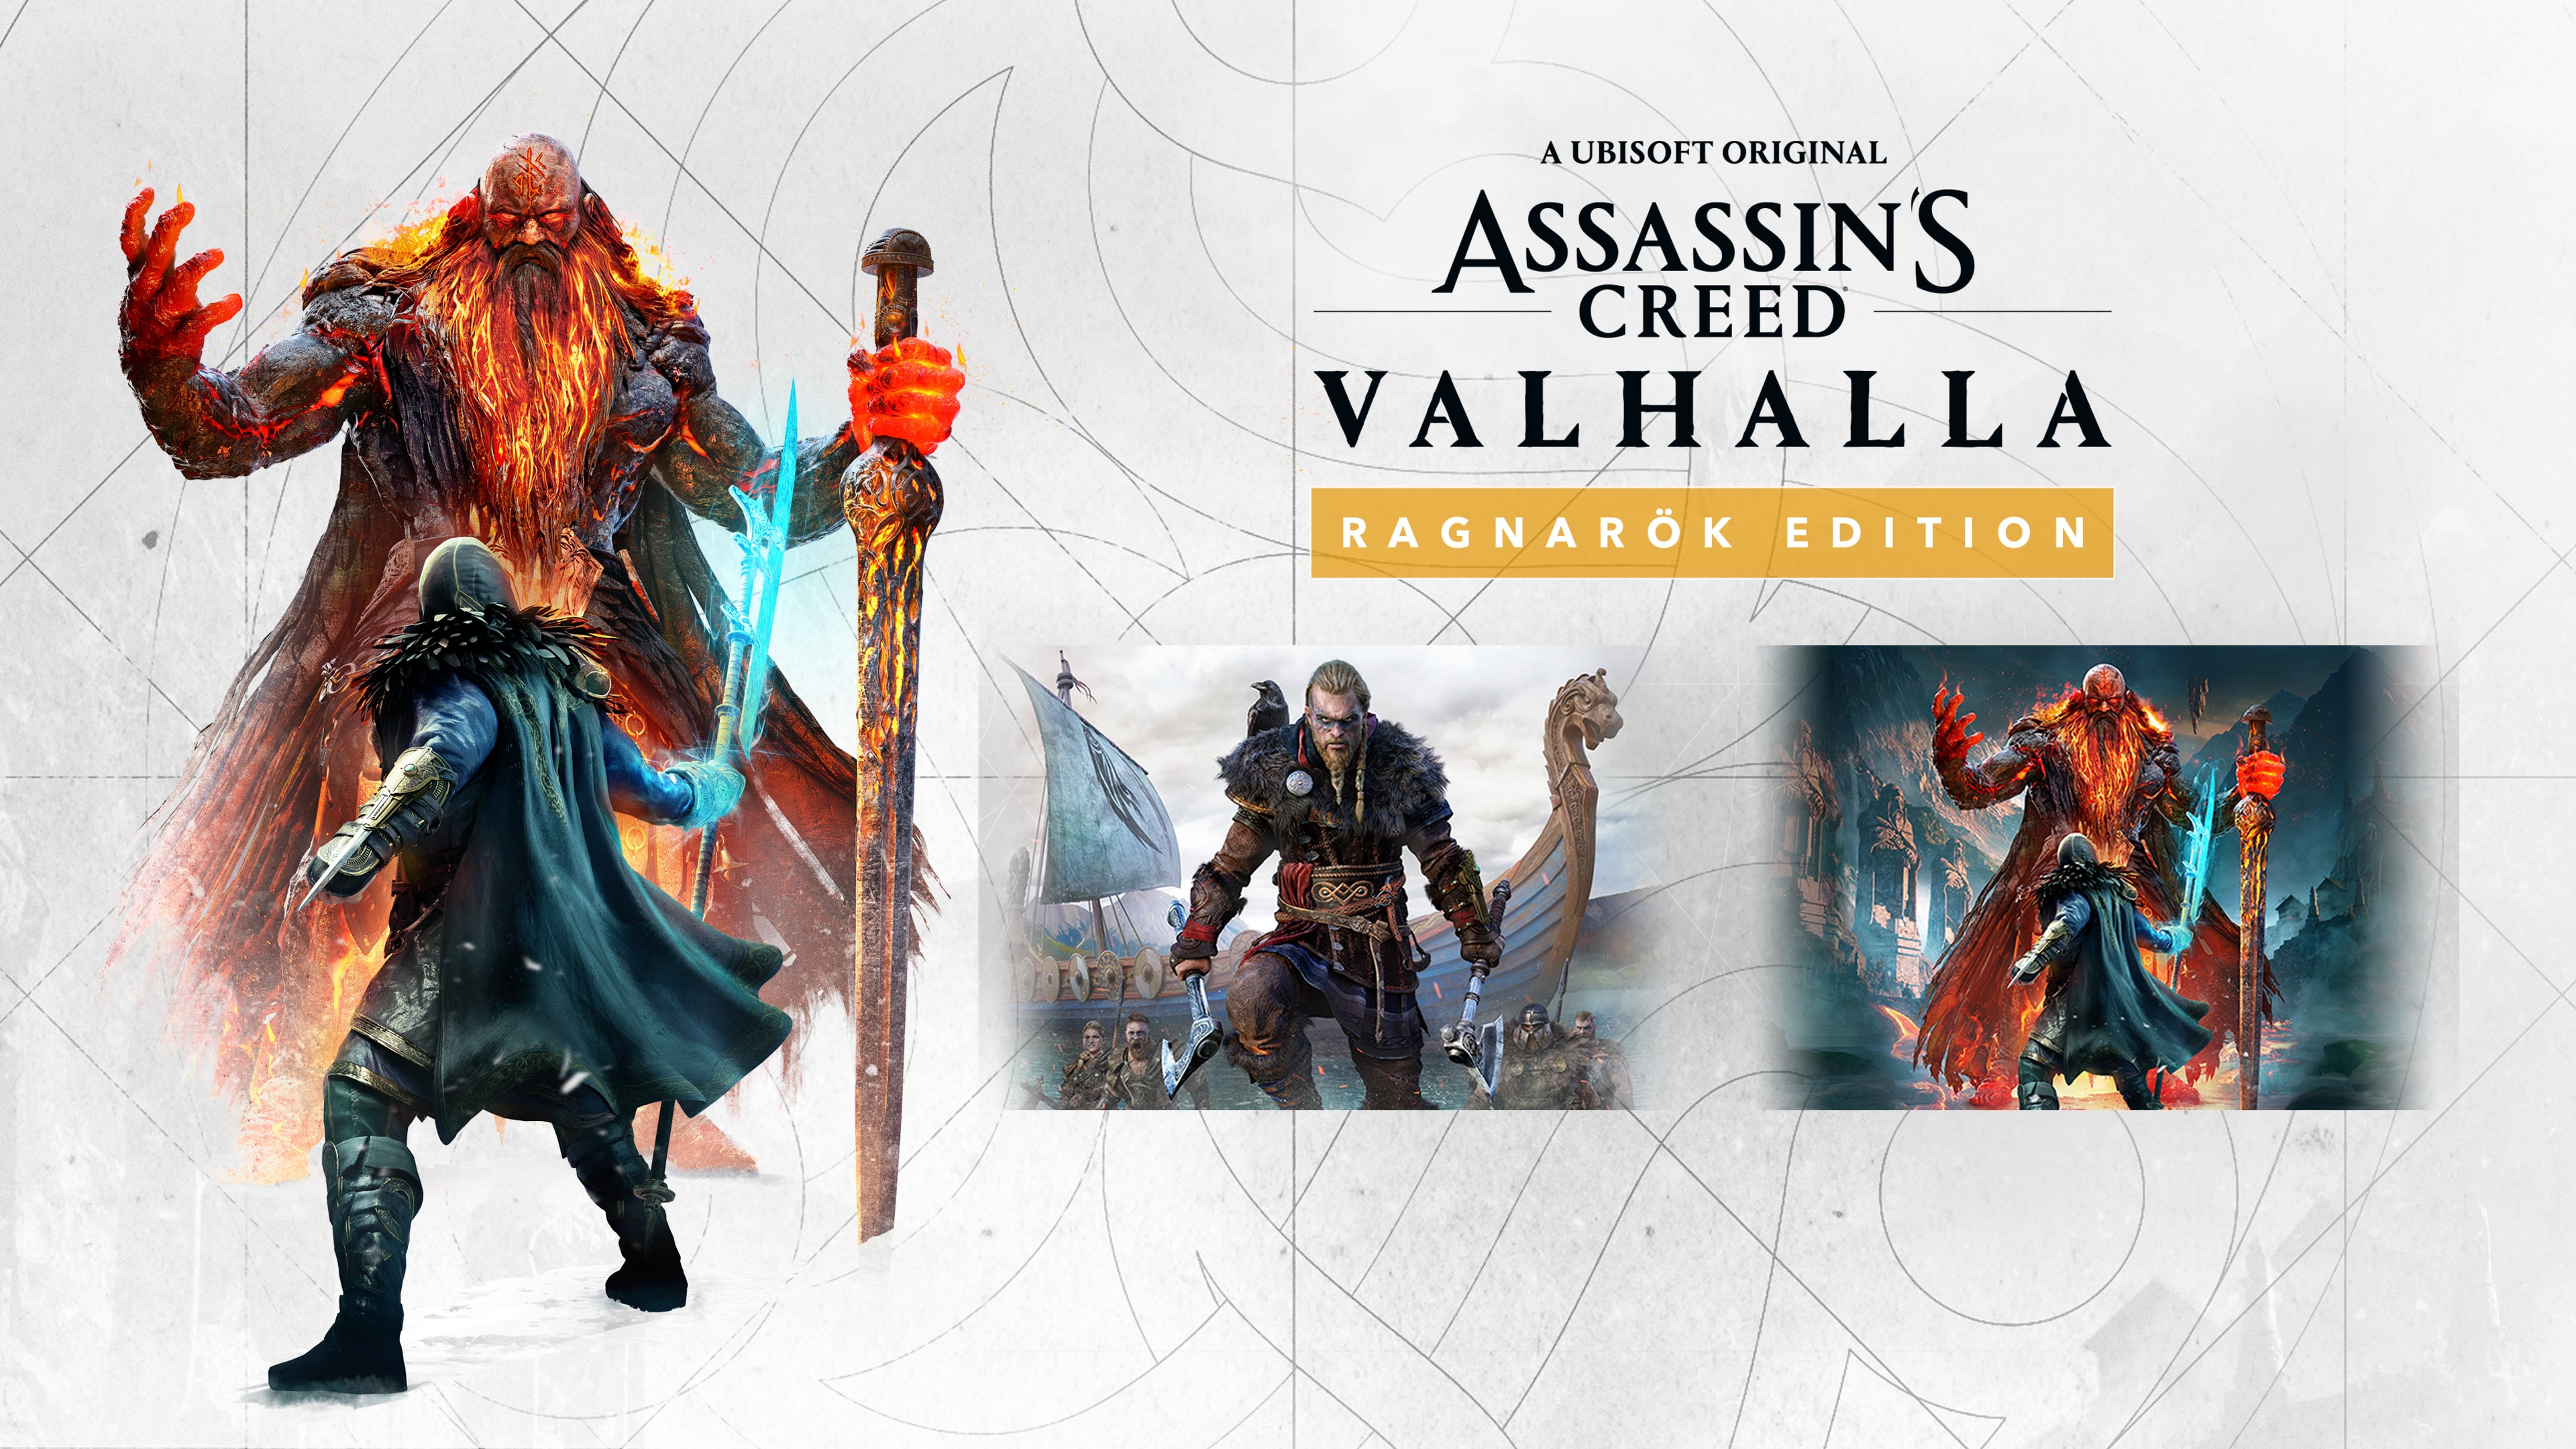 Assassin's Creed Valhalla: Complete Edition - $20.99 on PS Store (PS4 and PS5 version included.)